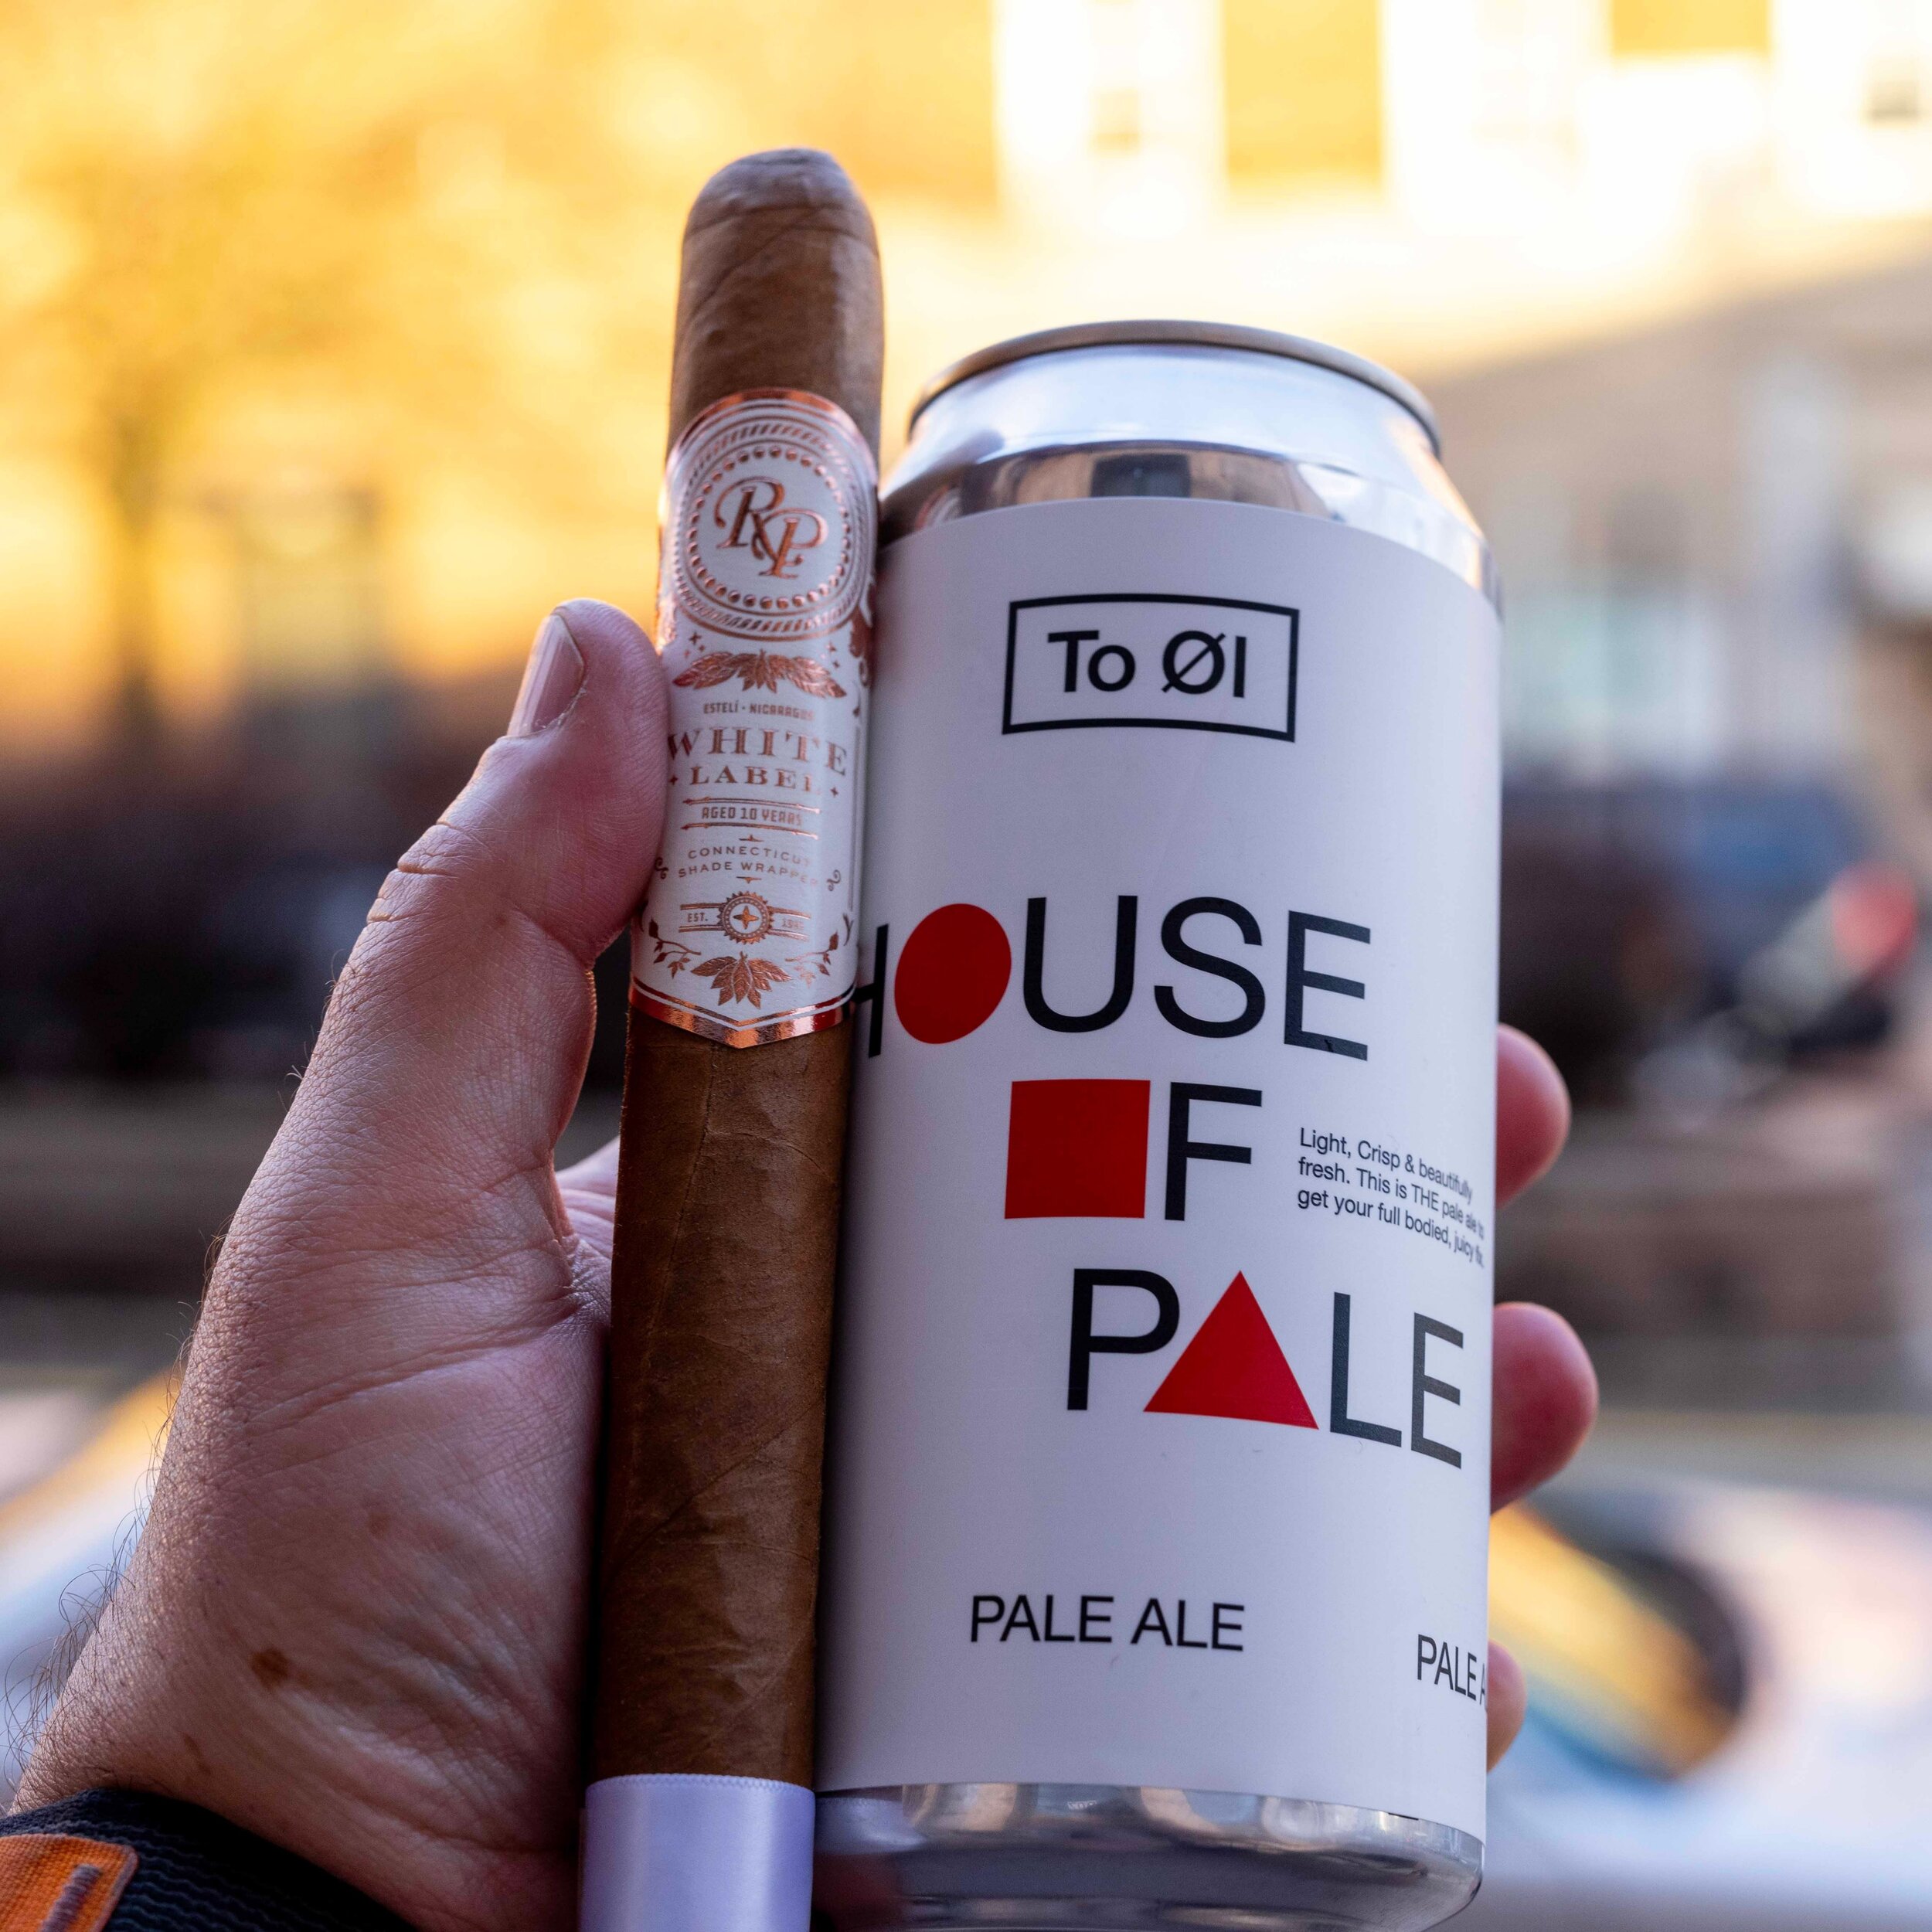 Quick shout out to @lorenzomitil for this tasty brew. 
House of Pale: To &Oslash;l&rsquo;s Latest Bid to Make You Feel Uncultured with Just a Sip.

Cigar: Rocky Patel White Label Churchill.